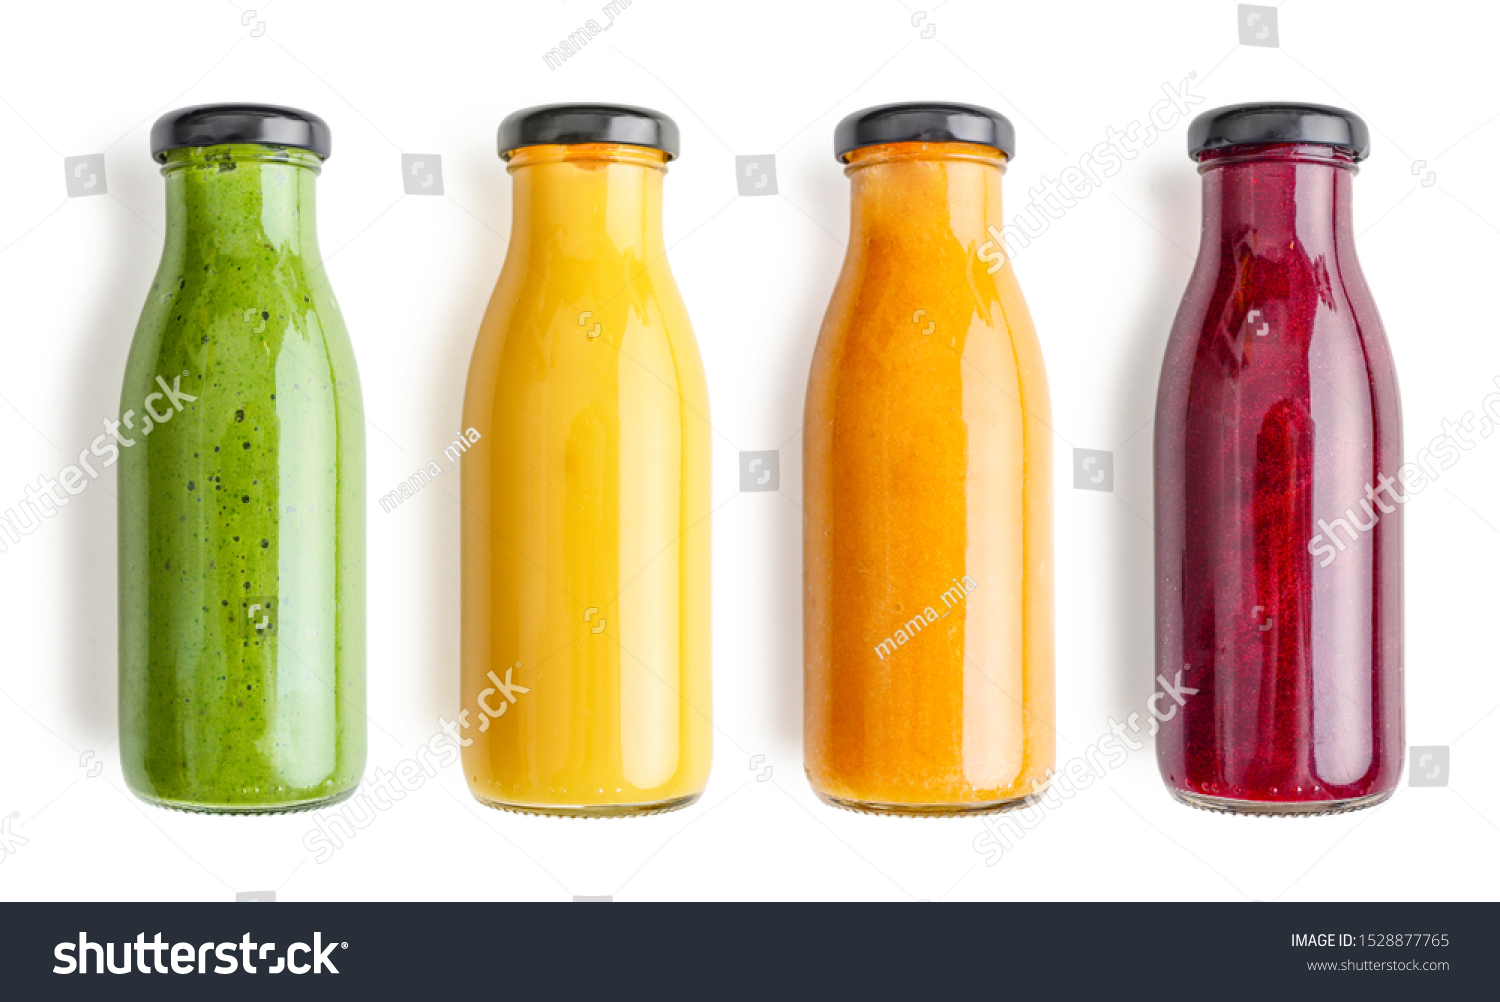 Green, yellow, orange and red smoothie in glass bottles isolated on white background, top view. Clipping path included. #1528877765